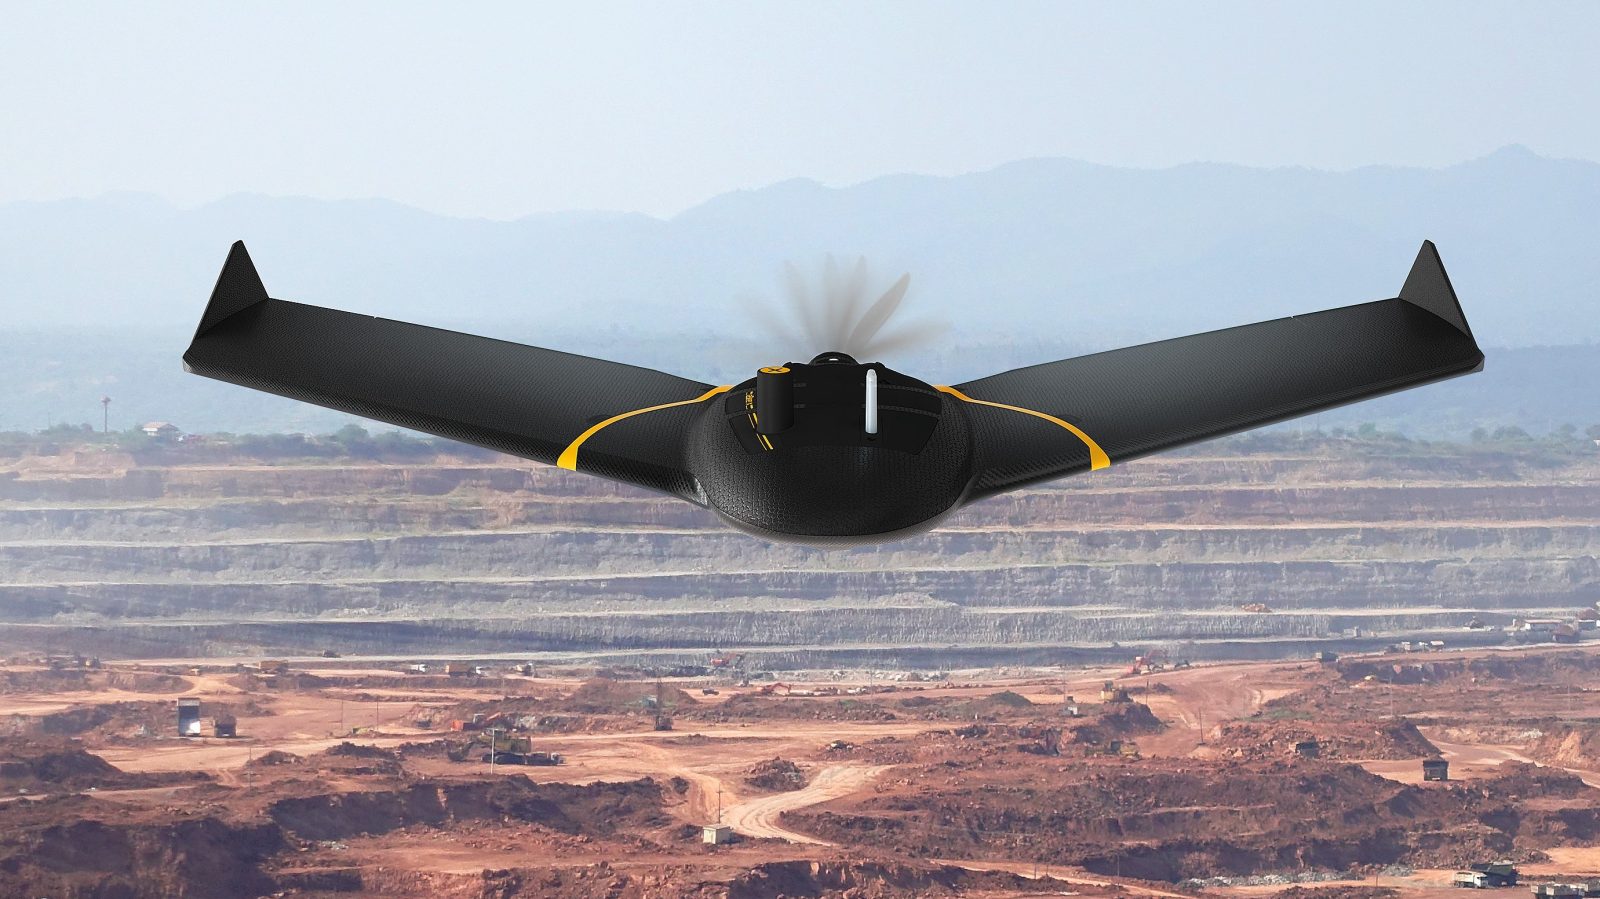 ebee x bvlos europe best fixed-wing drone trade c6 class label c2 up emergency response ageagle